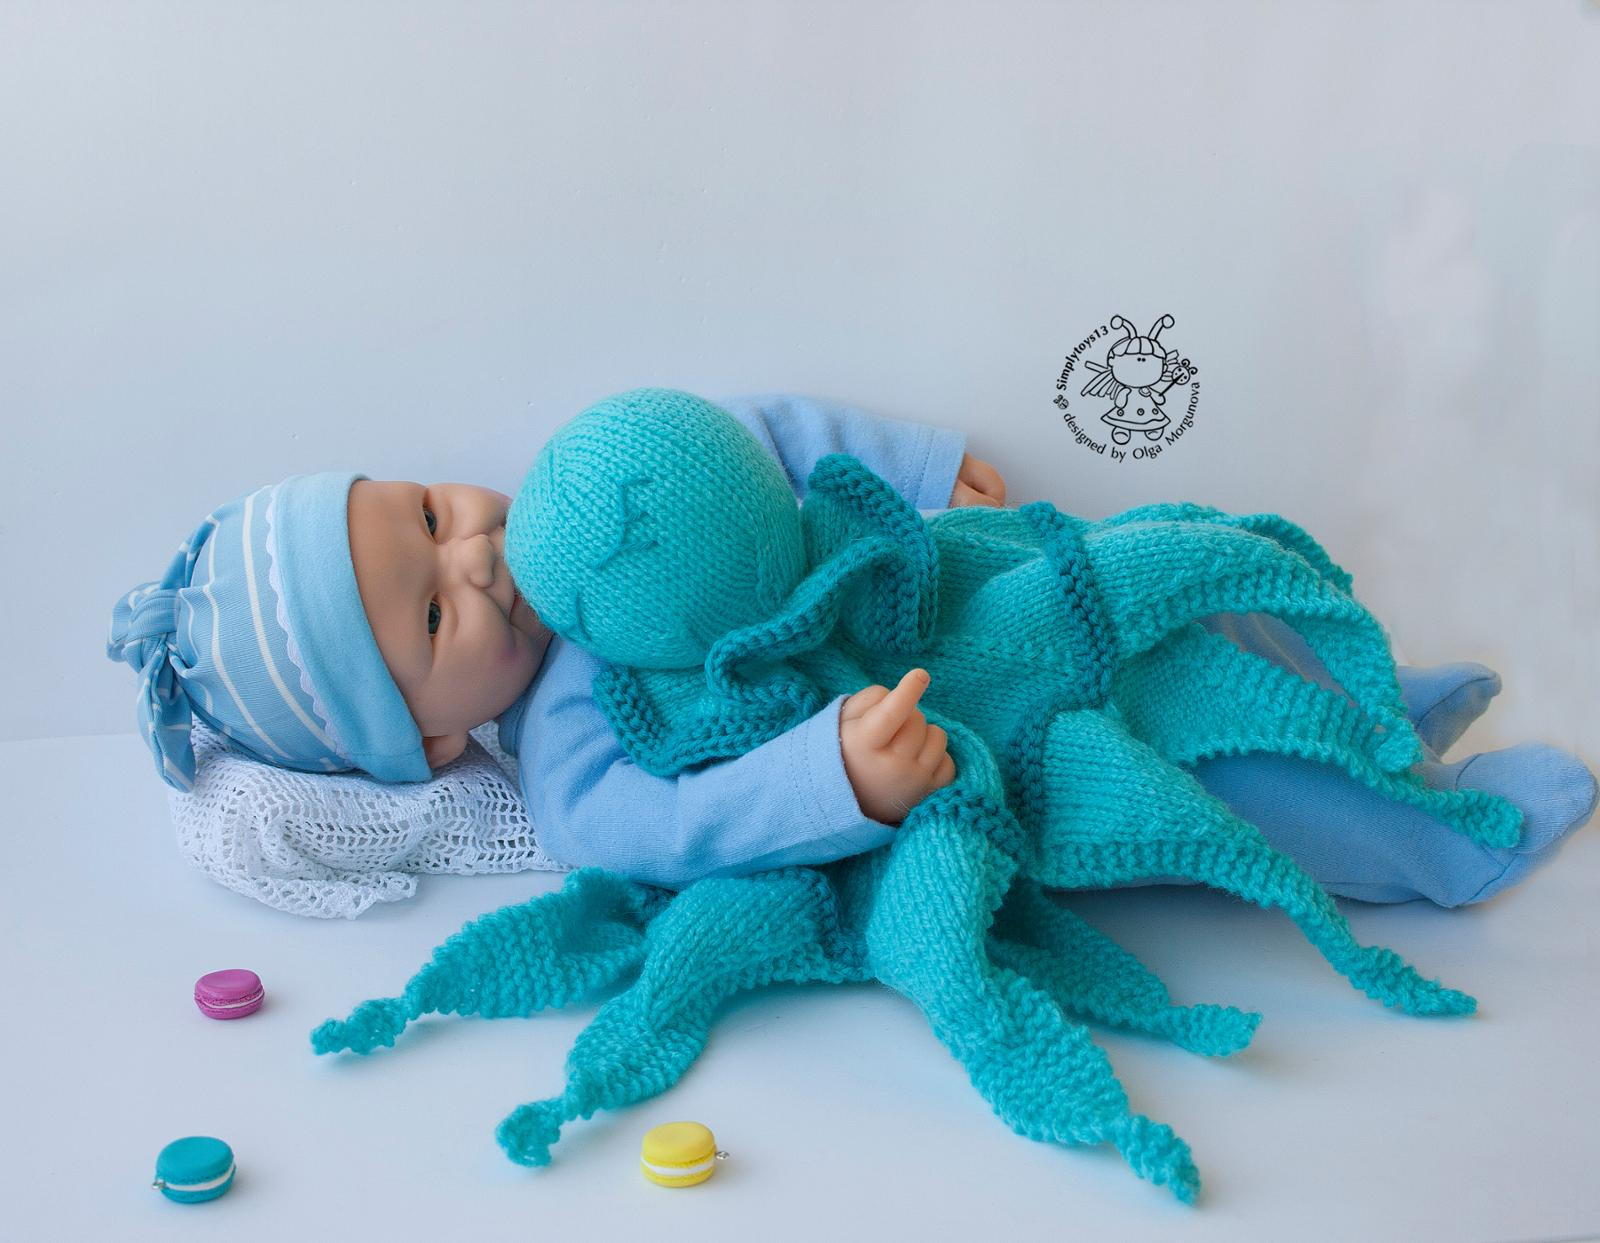 Knitting Patterns For Toys Uk The Knit Octopus For Babies The Latest And Greatest Way To Give Back